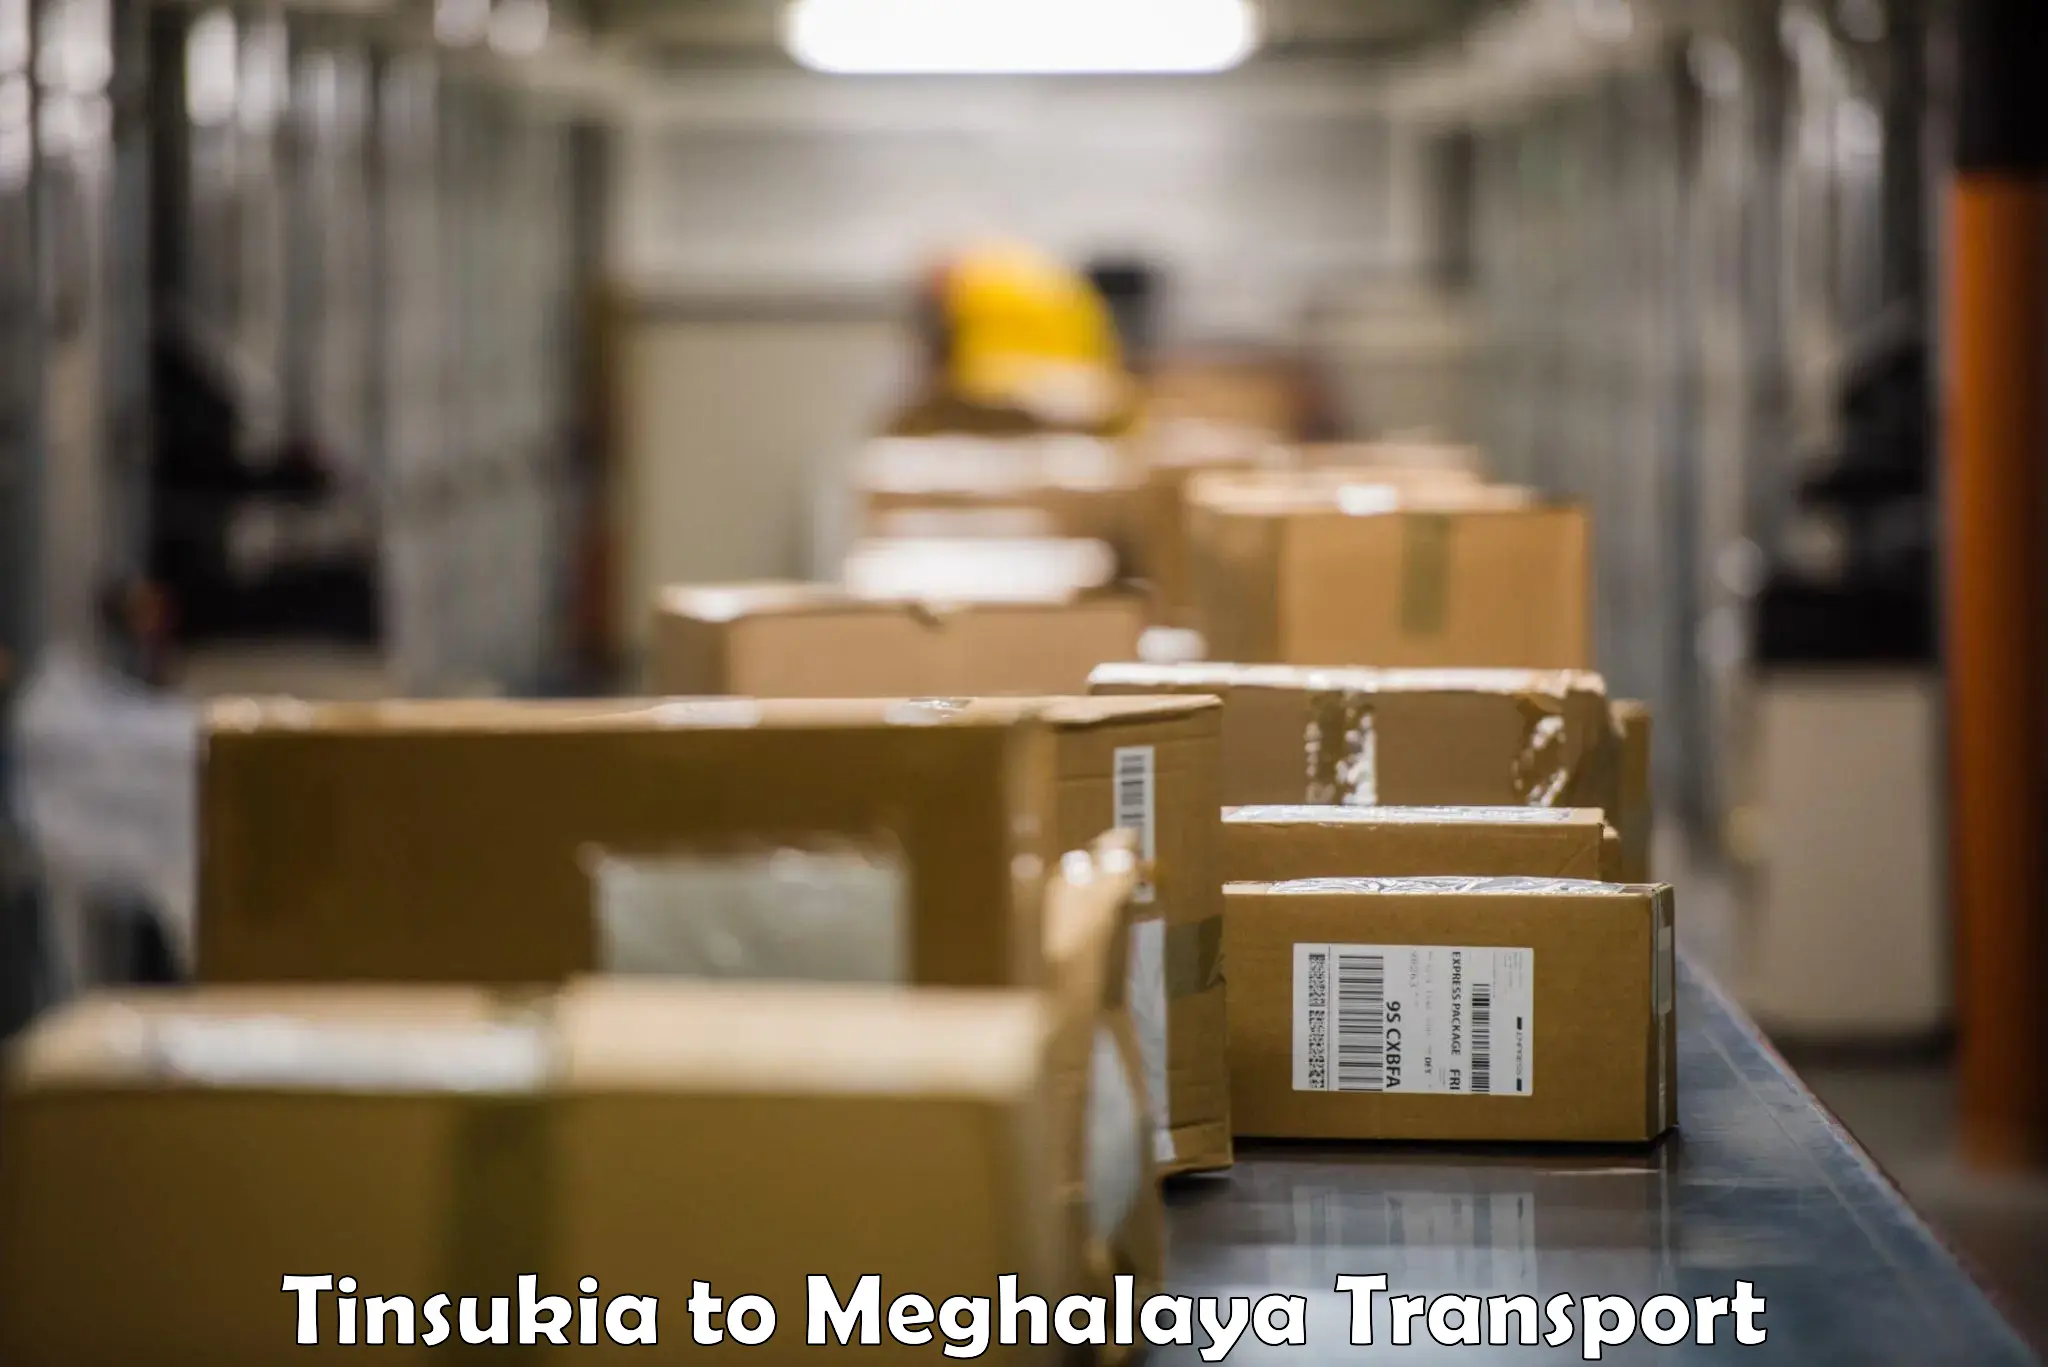 Daily parcel service transport Tinsukia to Shillong